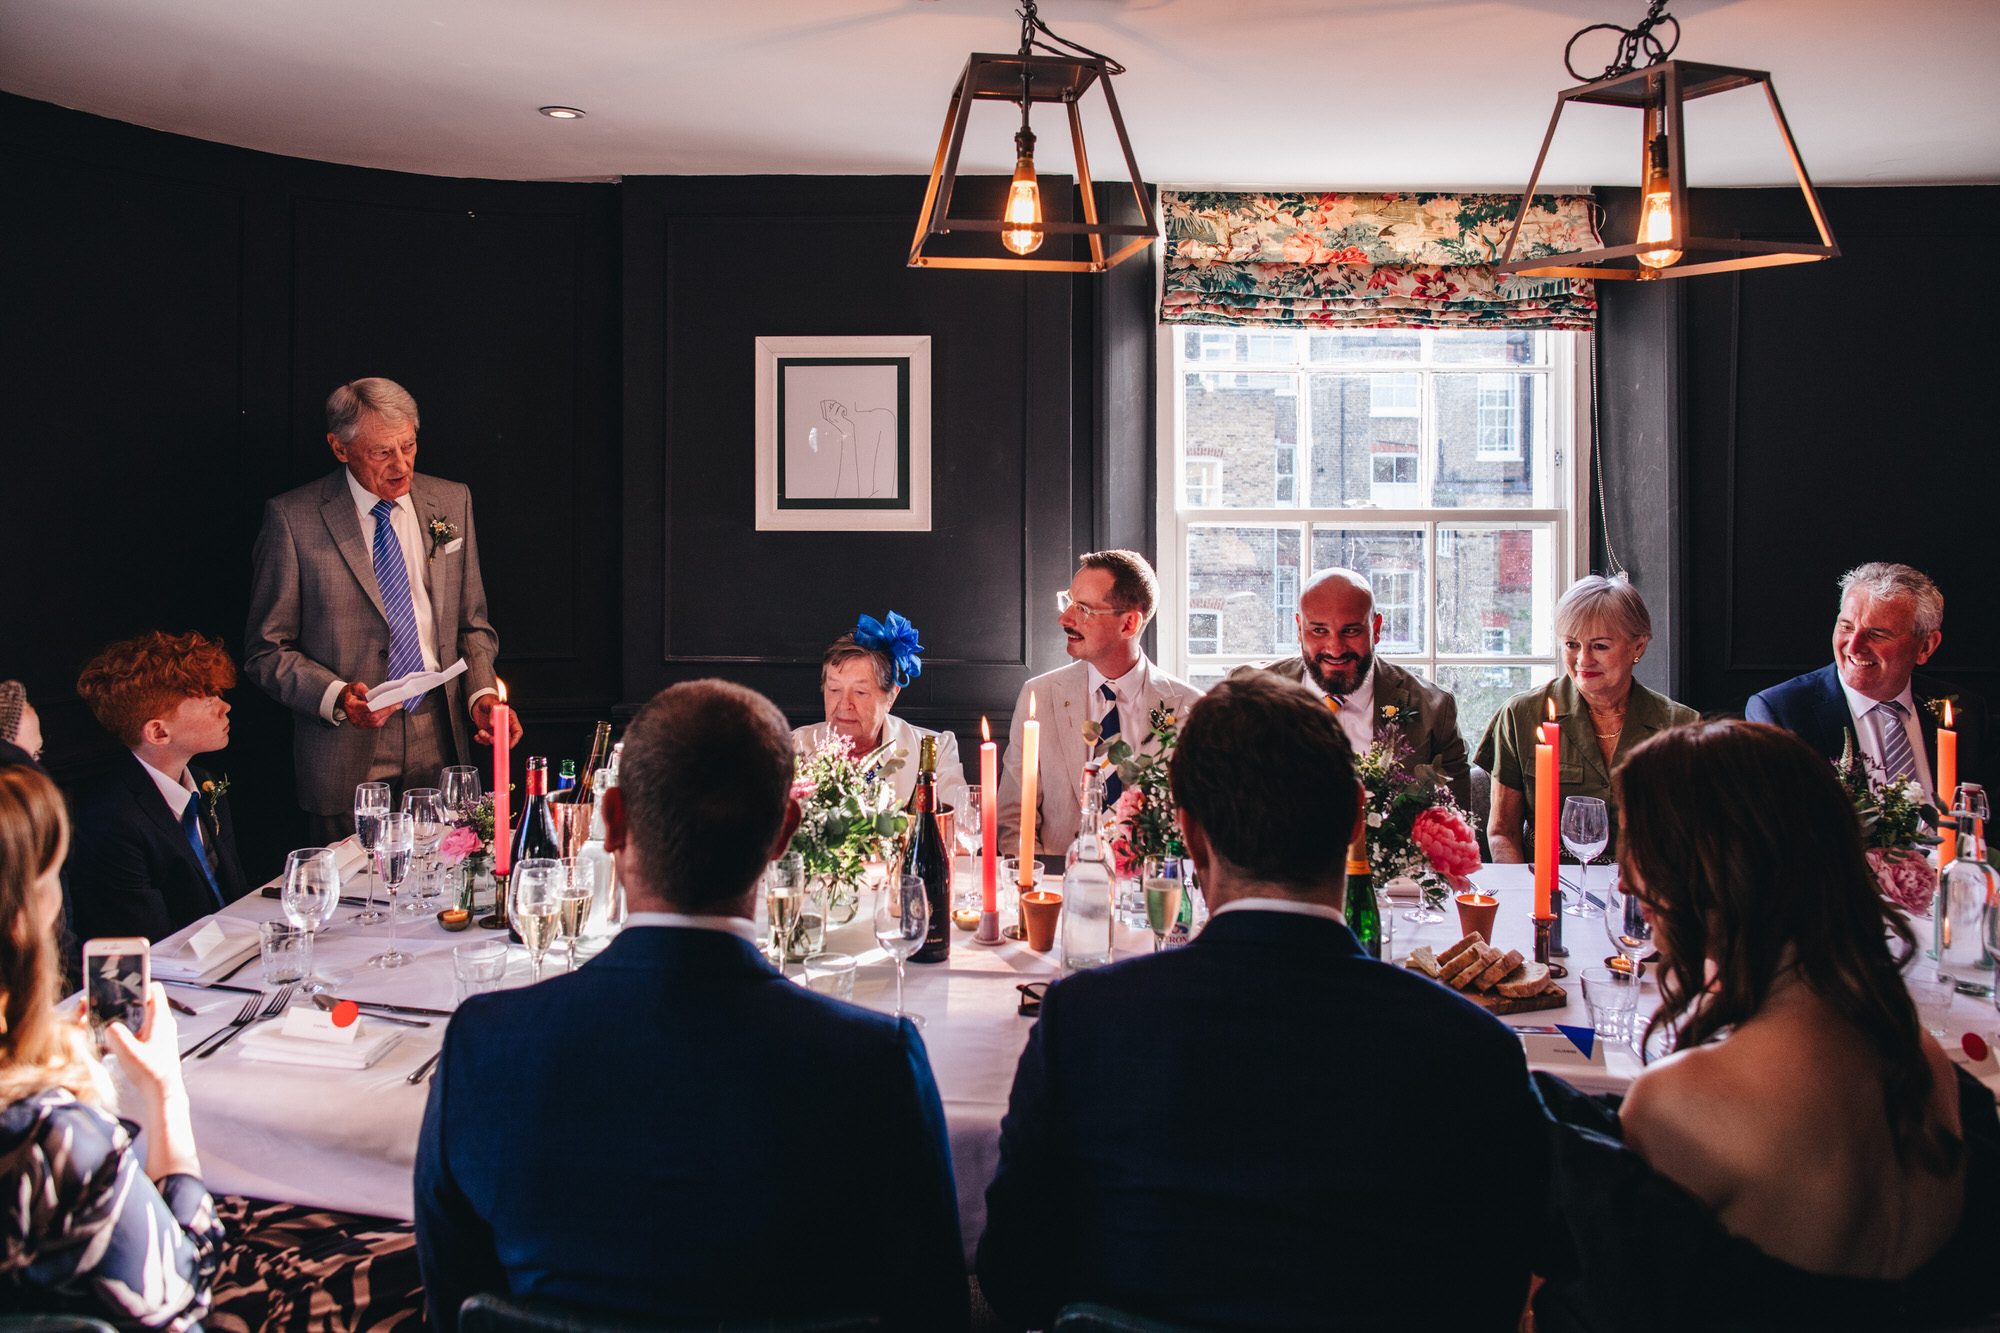 father of the groom makes speech at wedding breakfast inside London pub, London wedding at The Phene pub